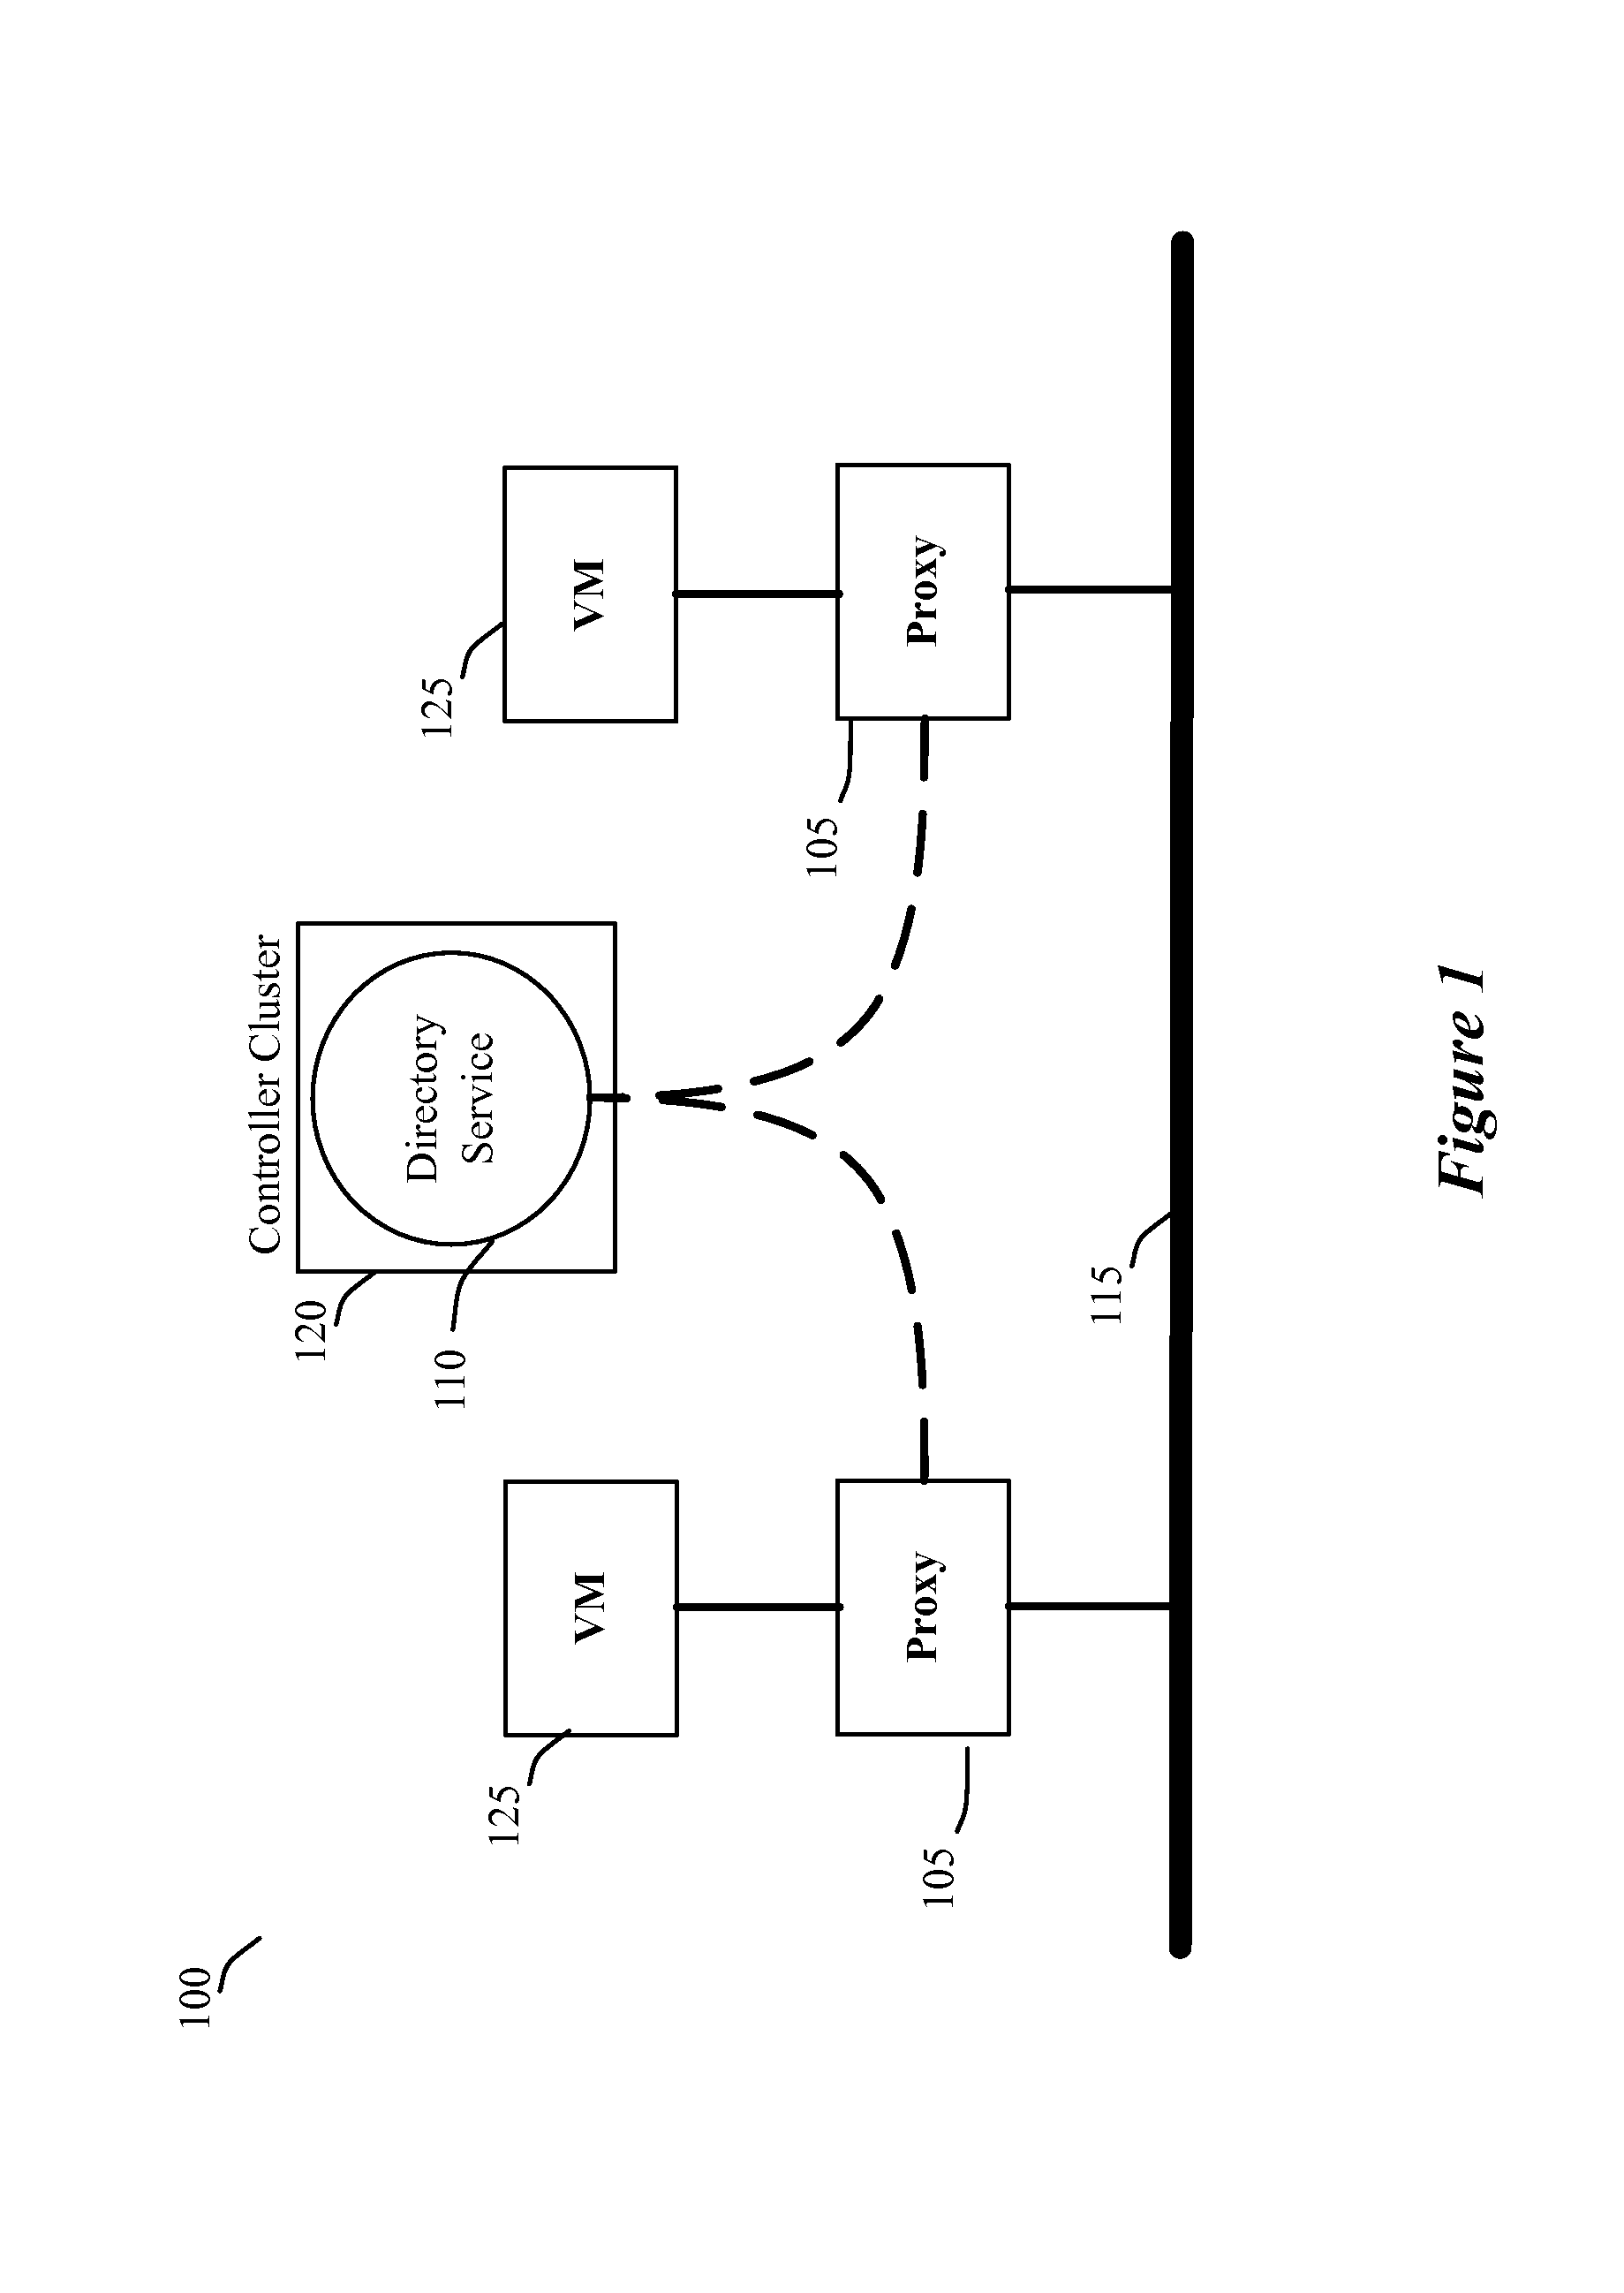 Proxy methods for suppressing broadcast traffic in a network